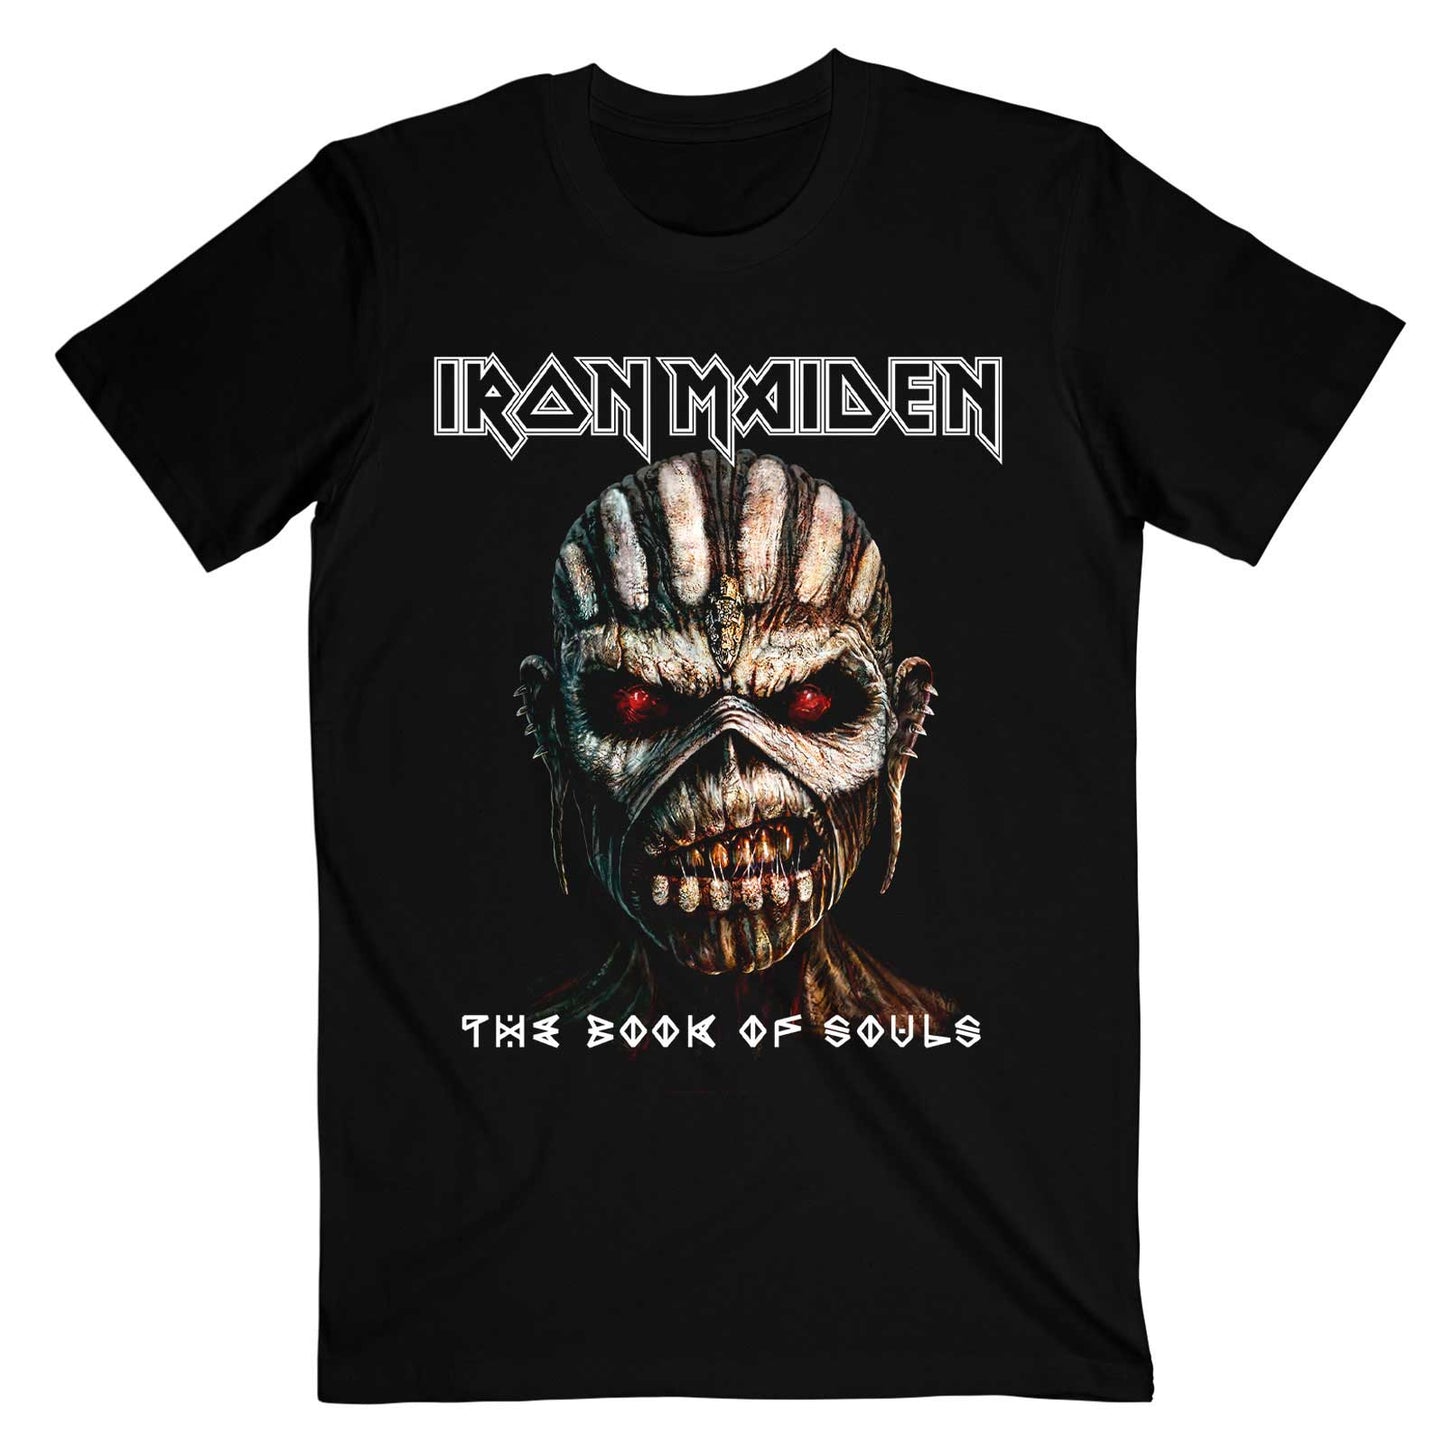 Iron Maiden Unisex T-Shirt: The Book of Souls